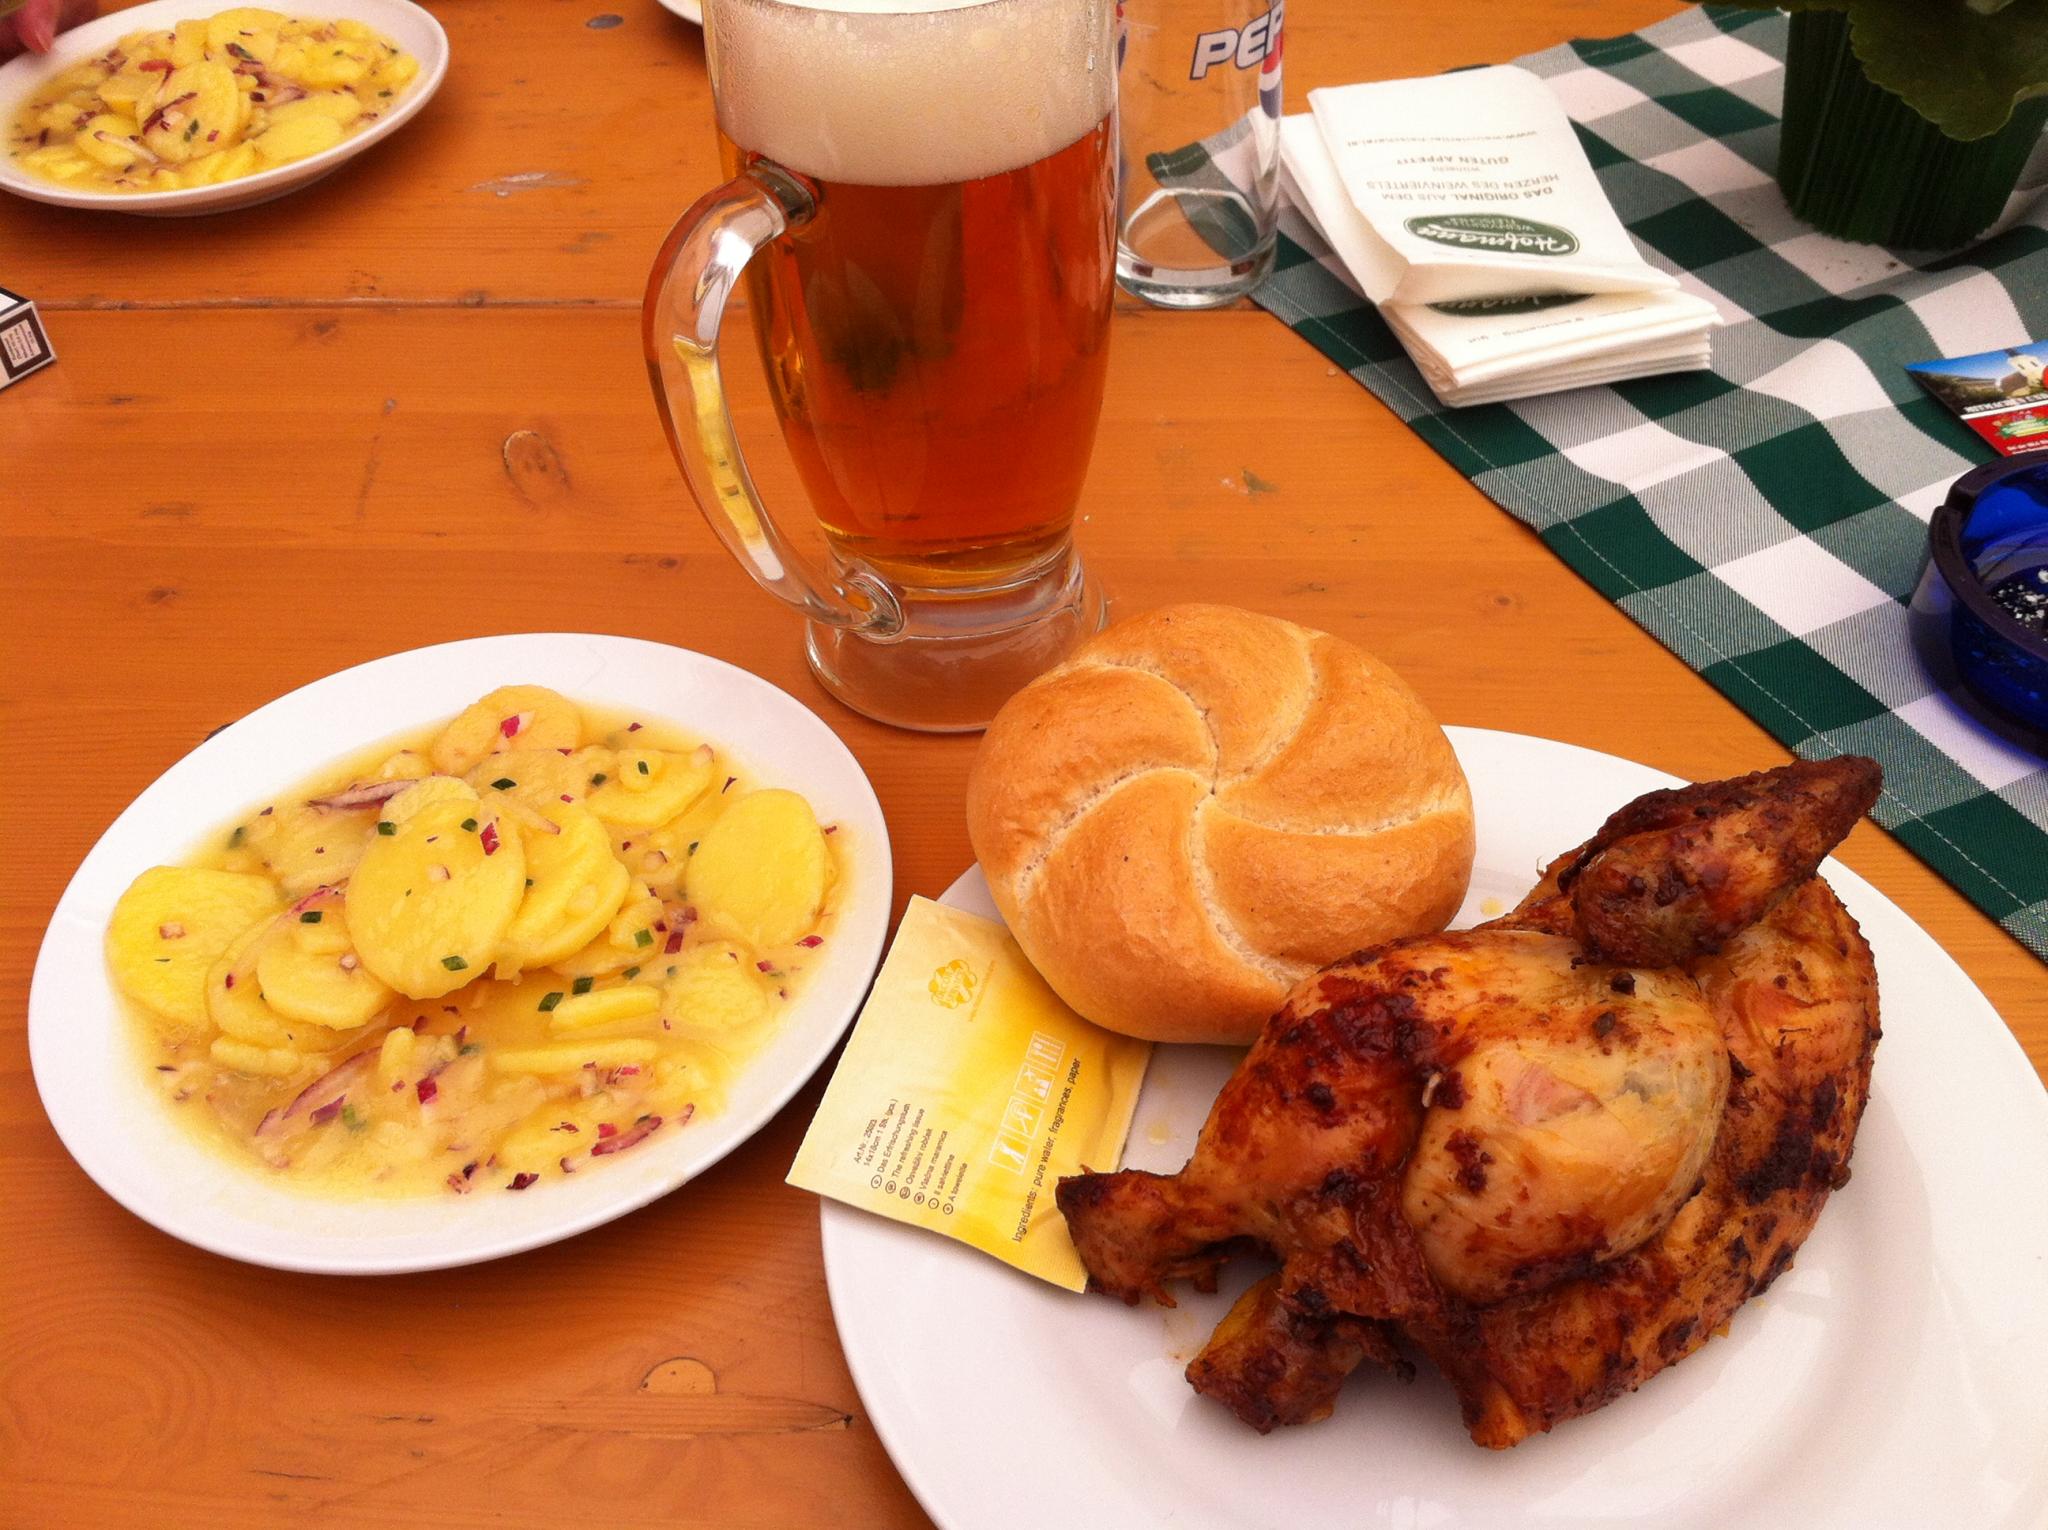 some food is on plates and next to a mug of beer